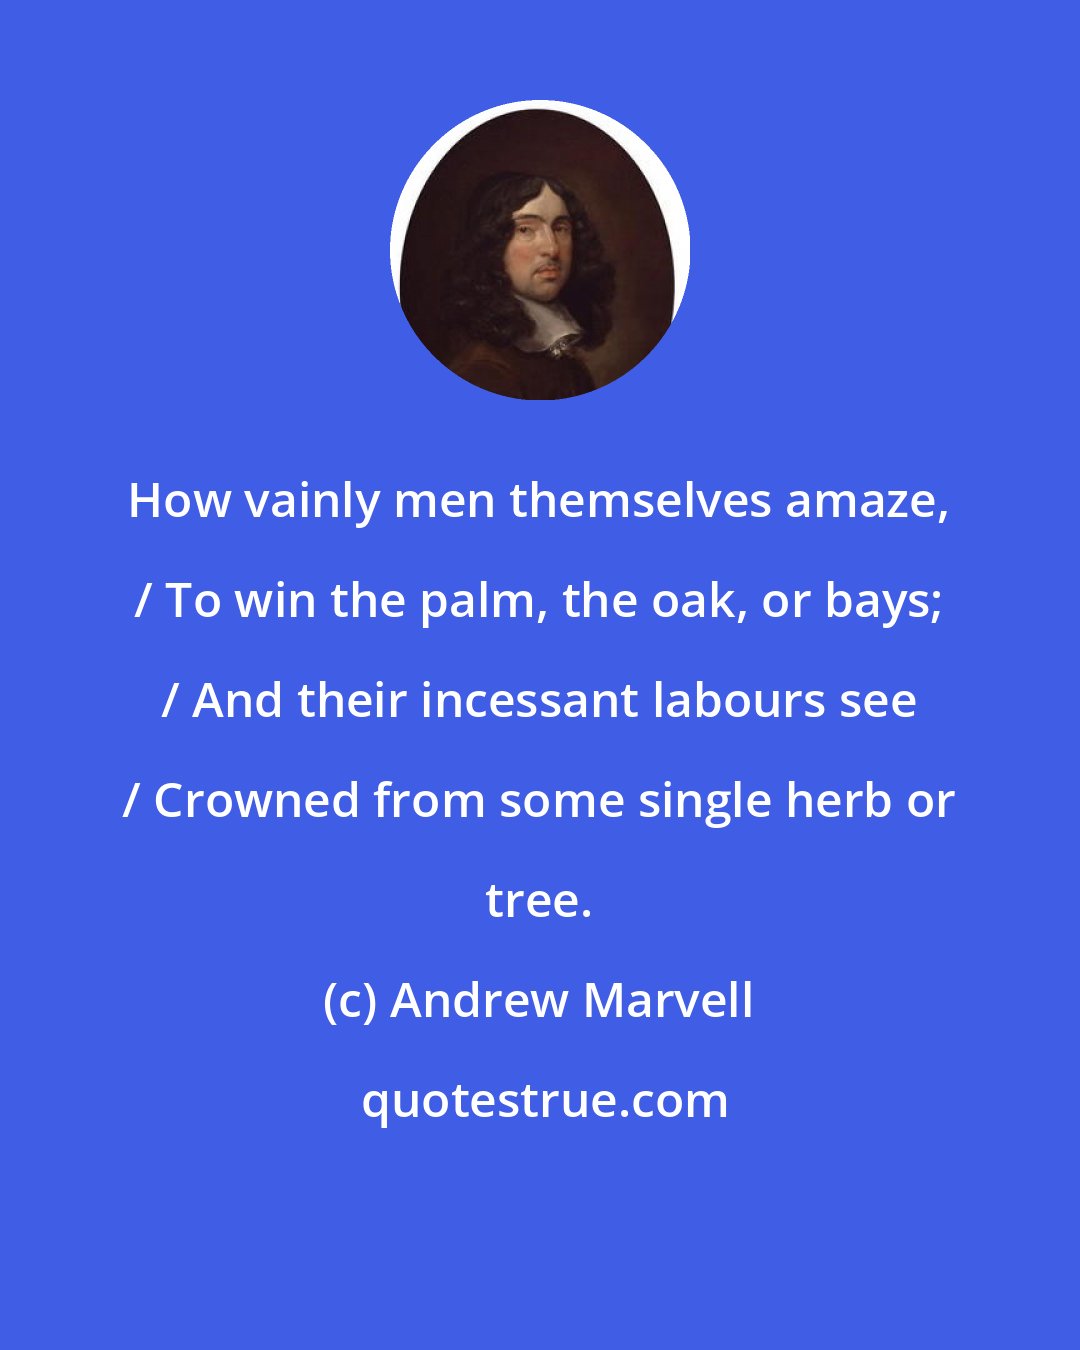 Andrew Marvell: How vainly men themselves amaze, / To win the palm, the oak, or bays; / And their incessant labours see / Crowned from some single herb or tree.